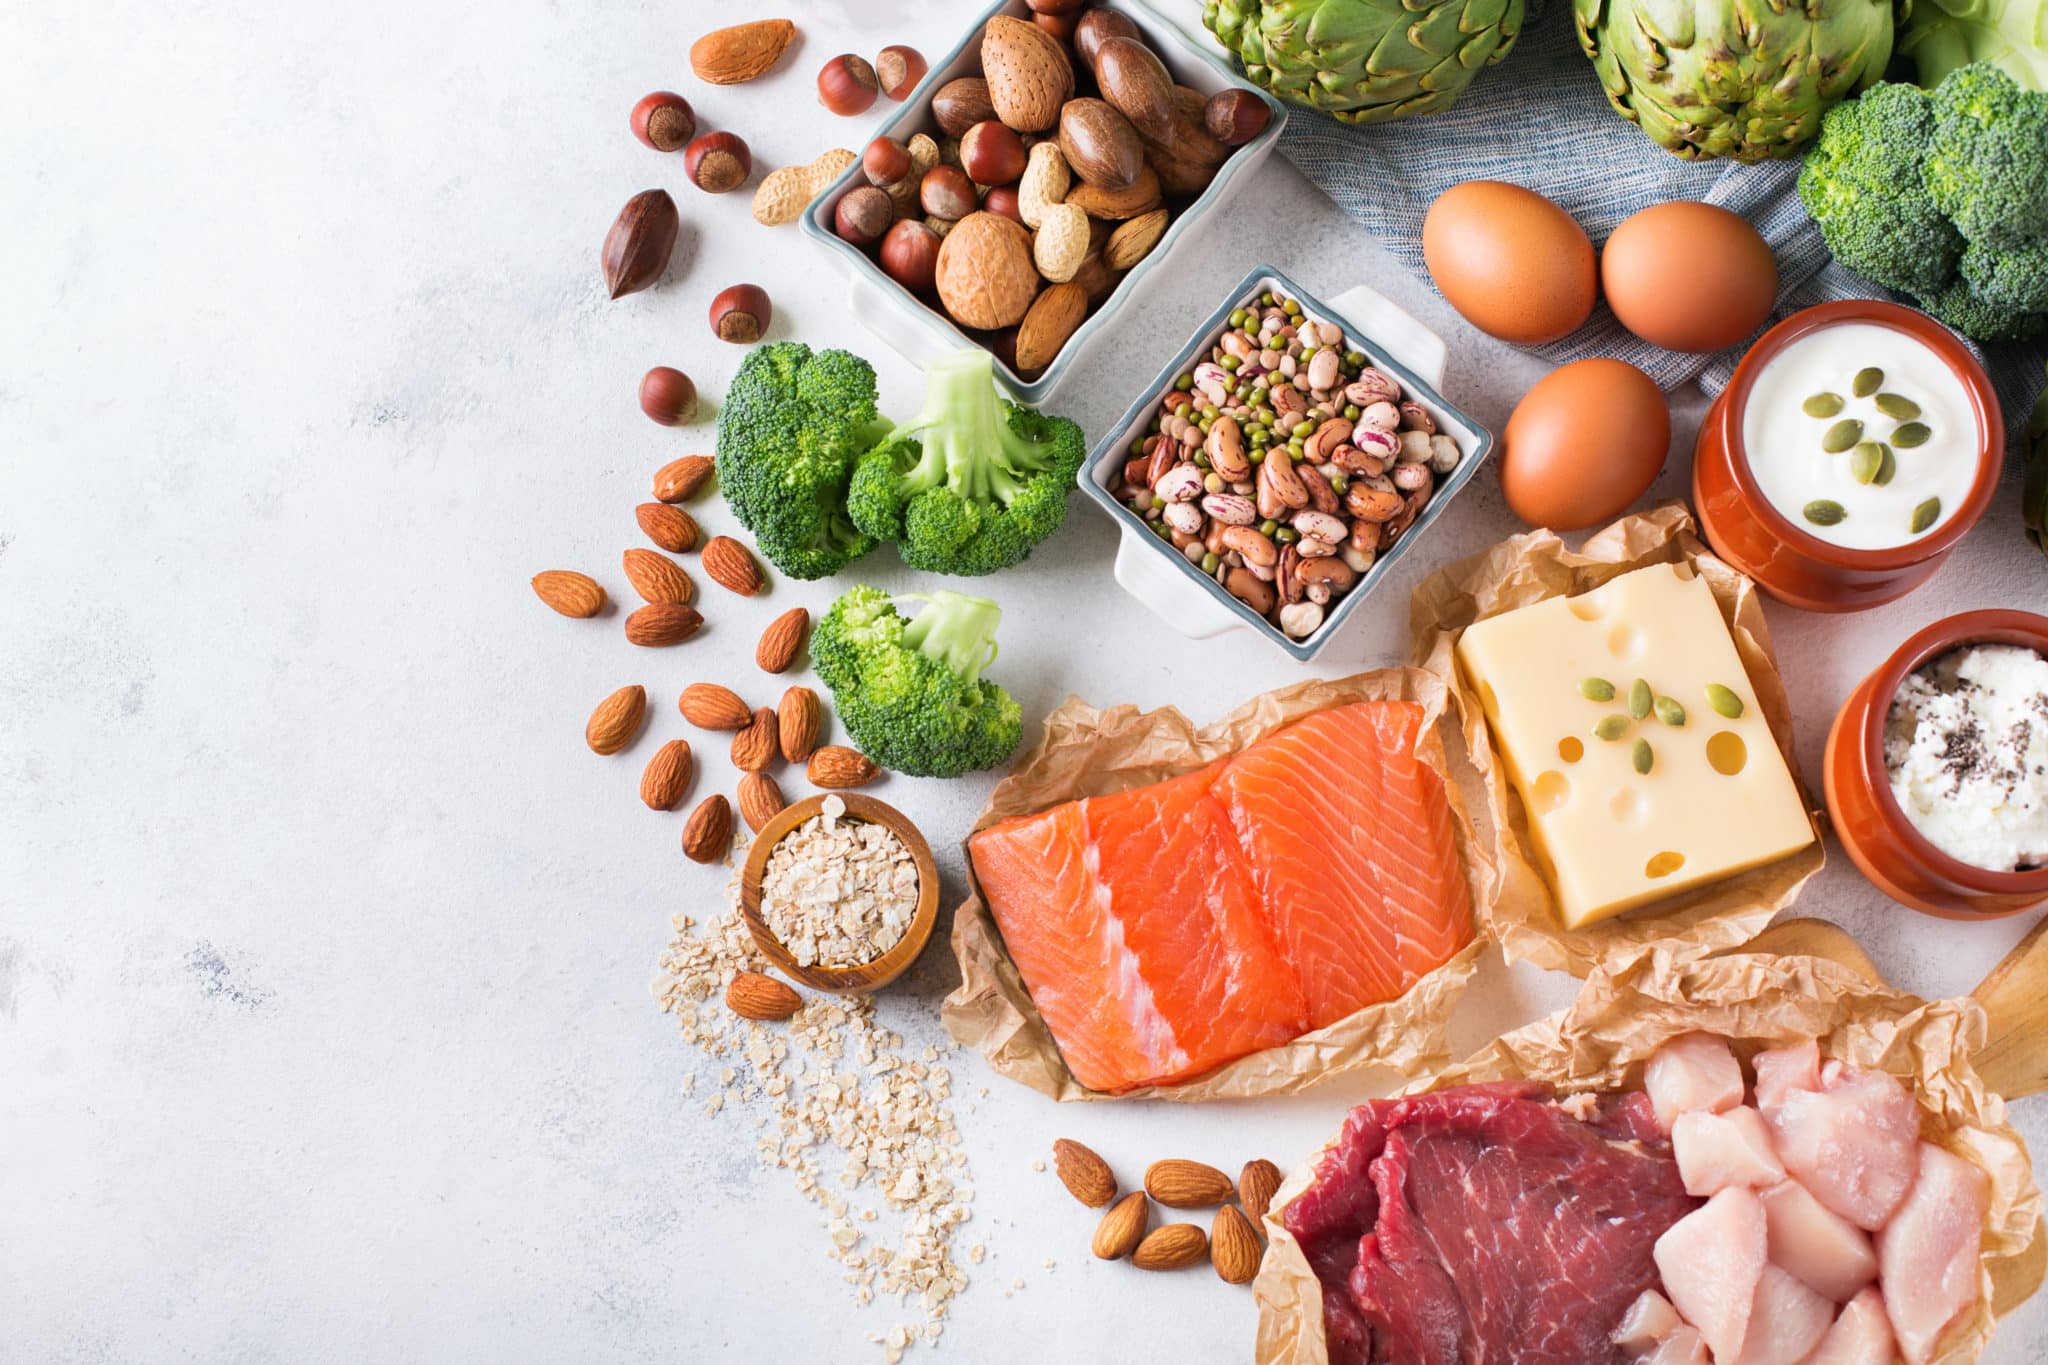 Table of proteins like salmon, red meat, cheese, eggs and nuts